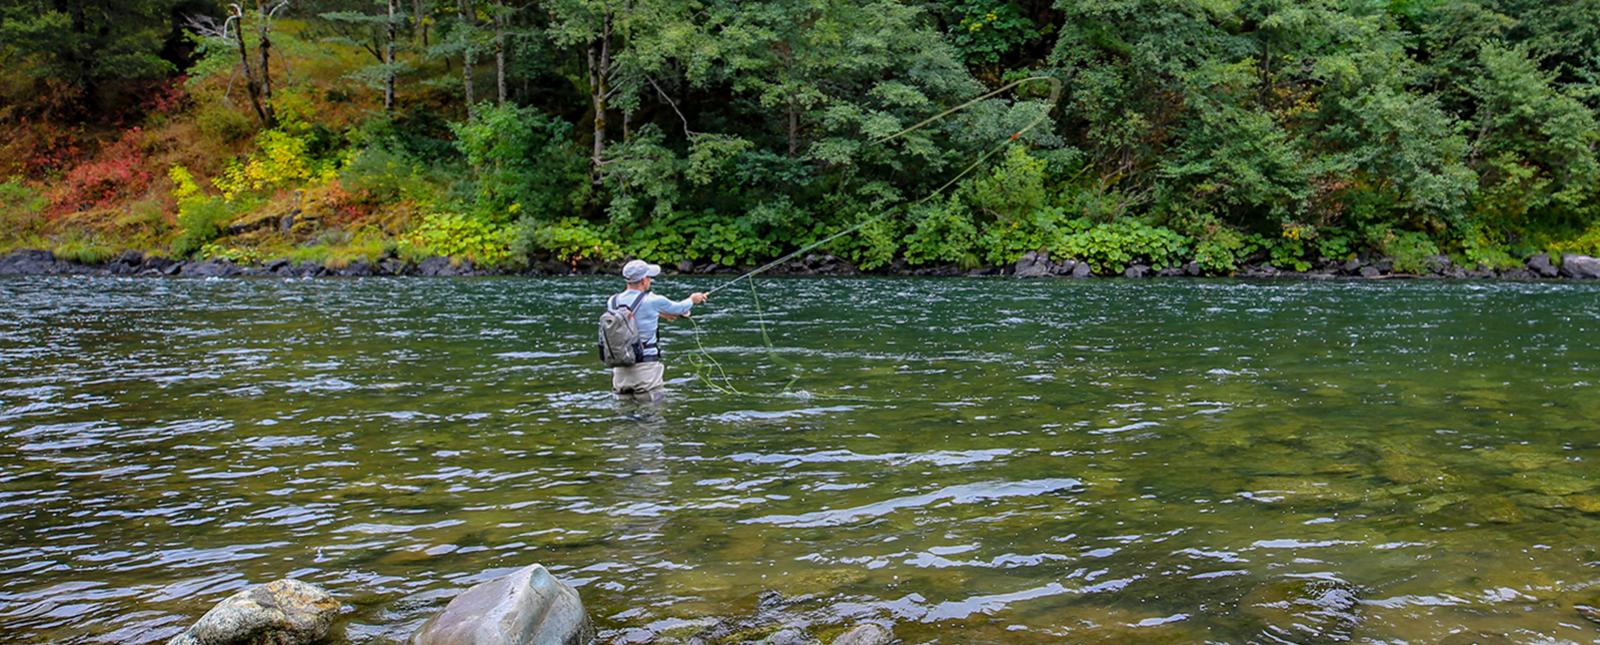 Fly fishing along Connecticut riverside